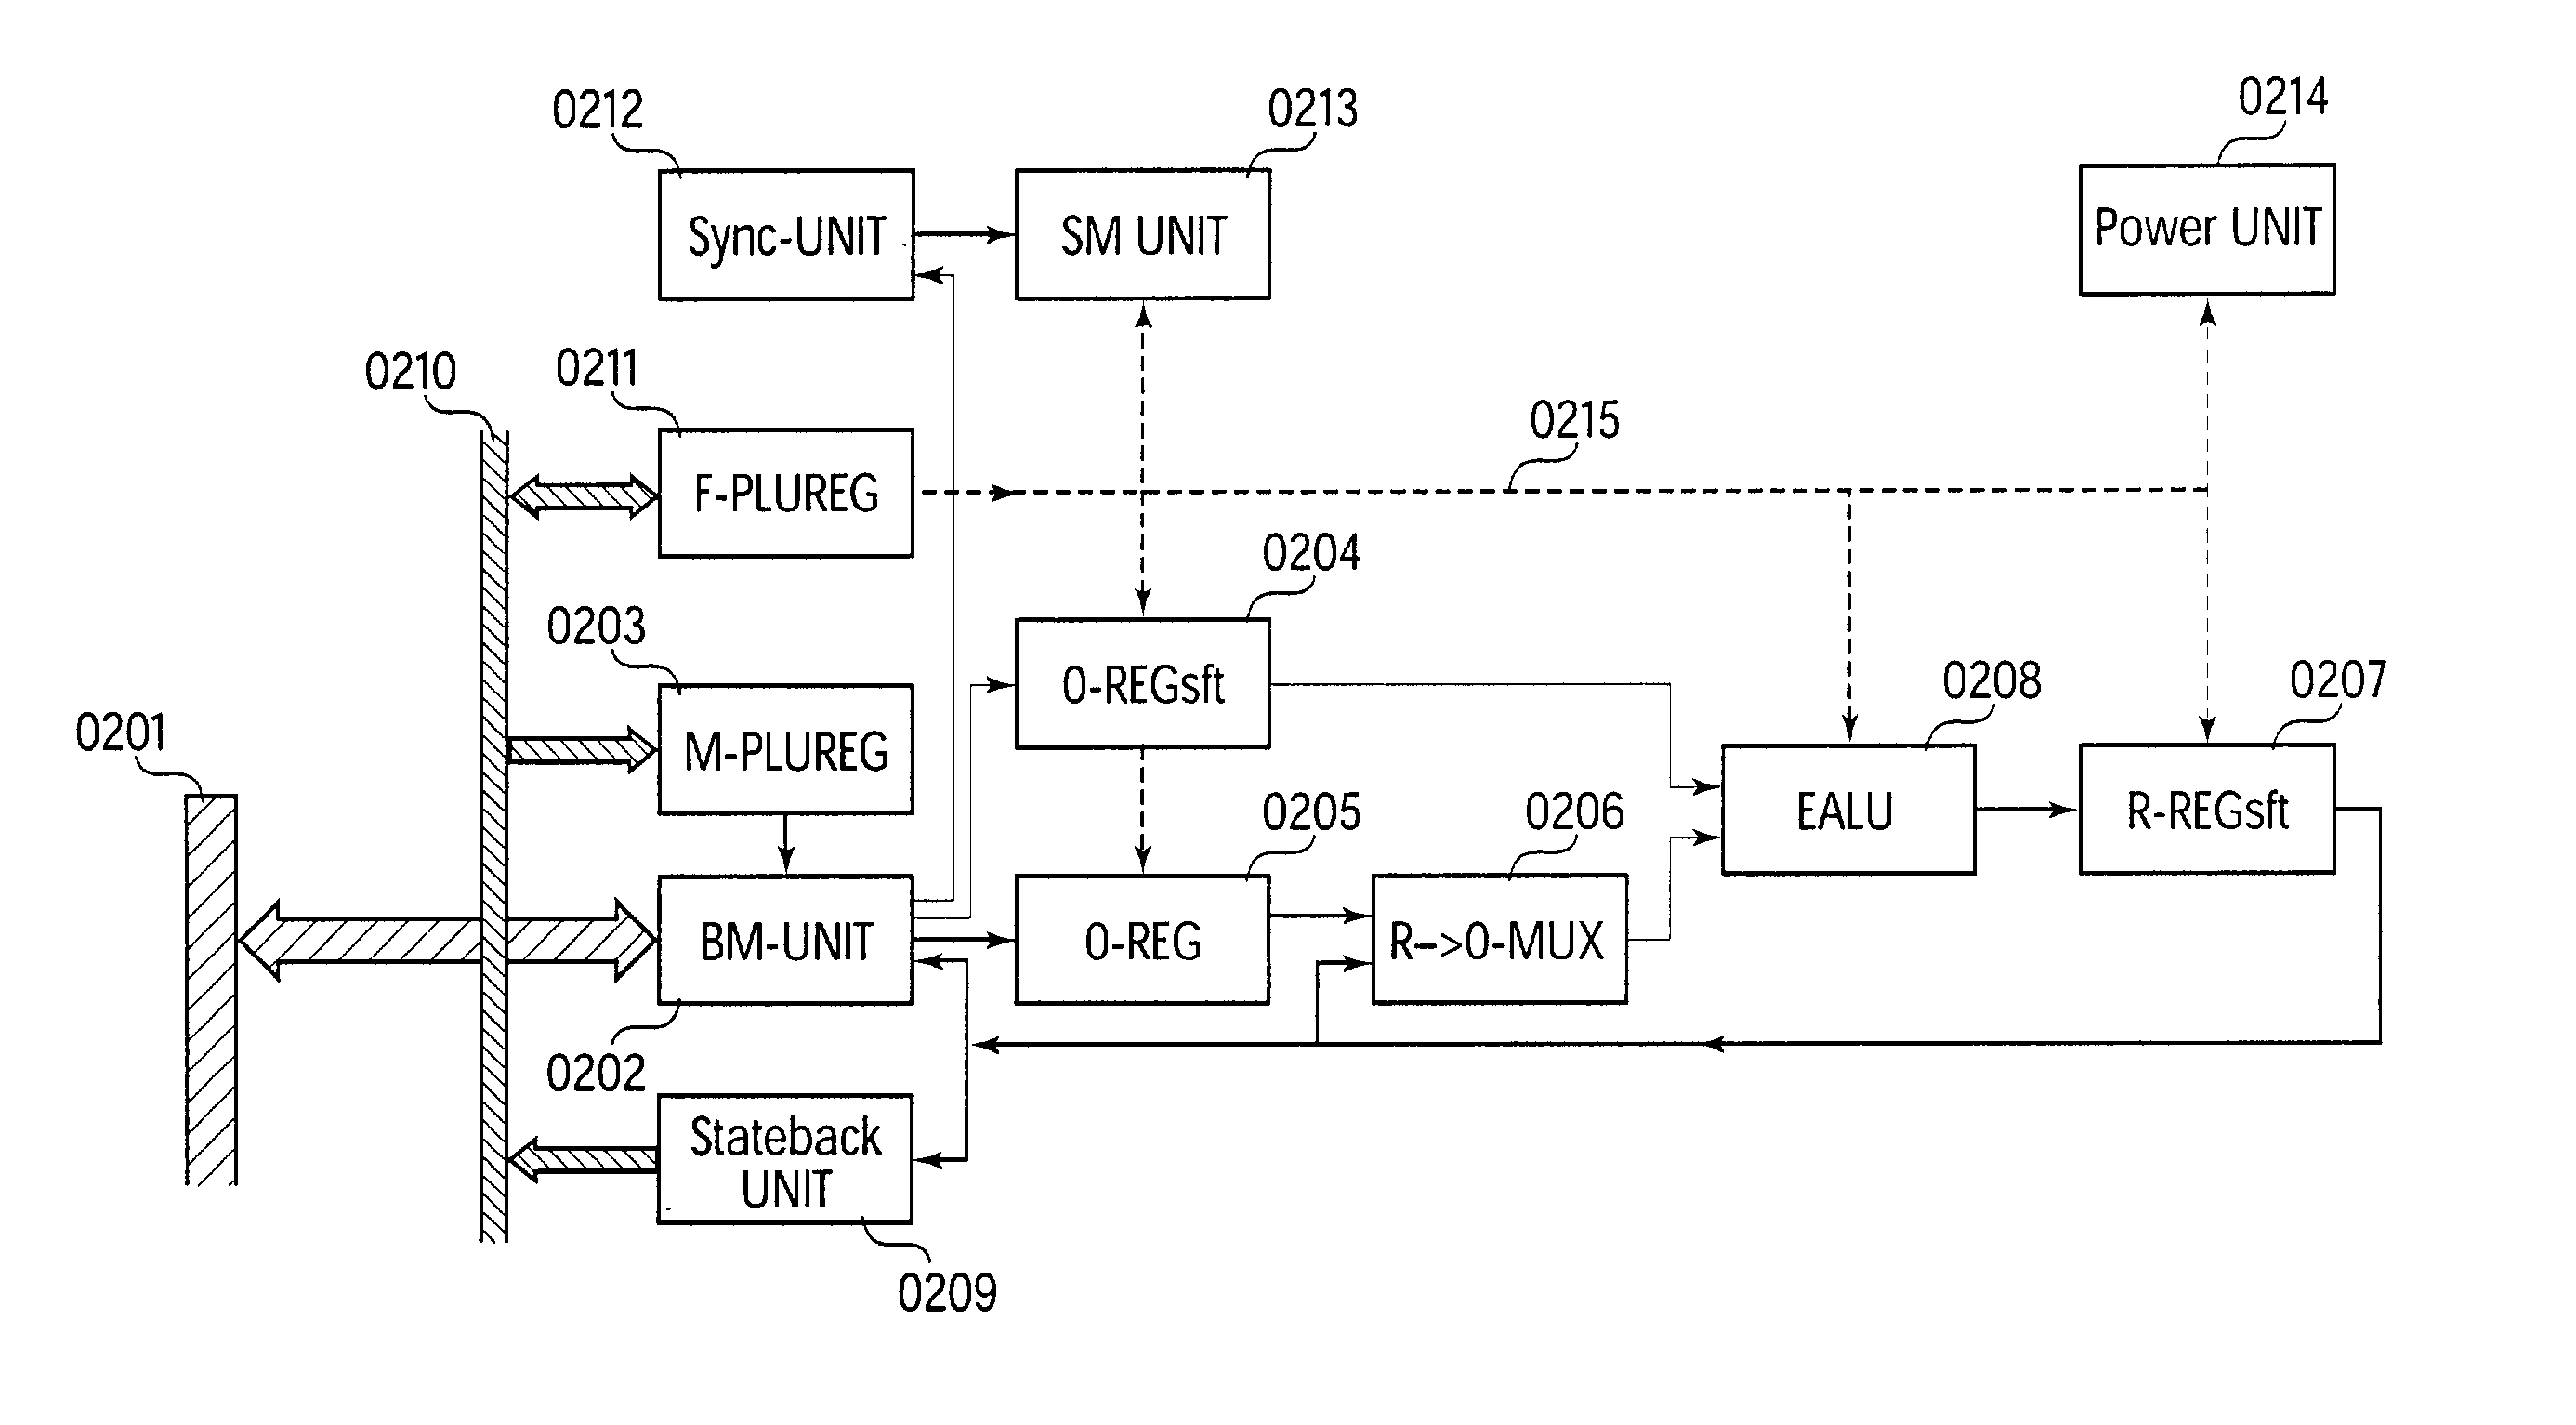 Unit for processing numeric and logic operations for use in central processing units (CPUS), multiprocessor systems, data-flow processors (DSPS), systolic processors and field programmable gate arrays (FPGAS)